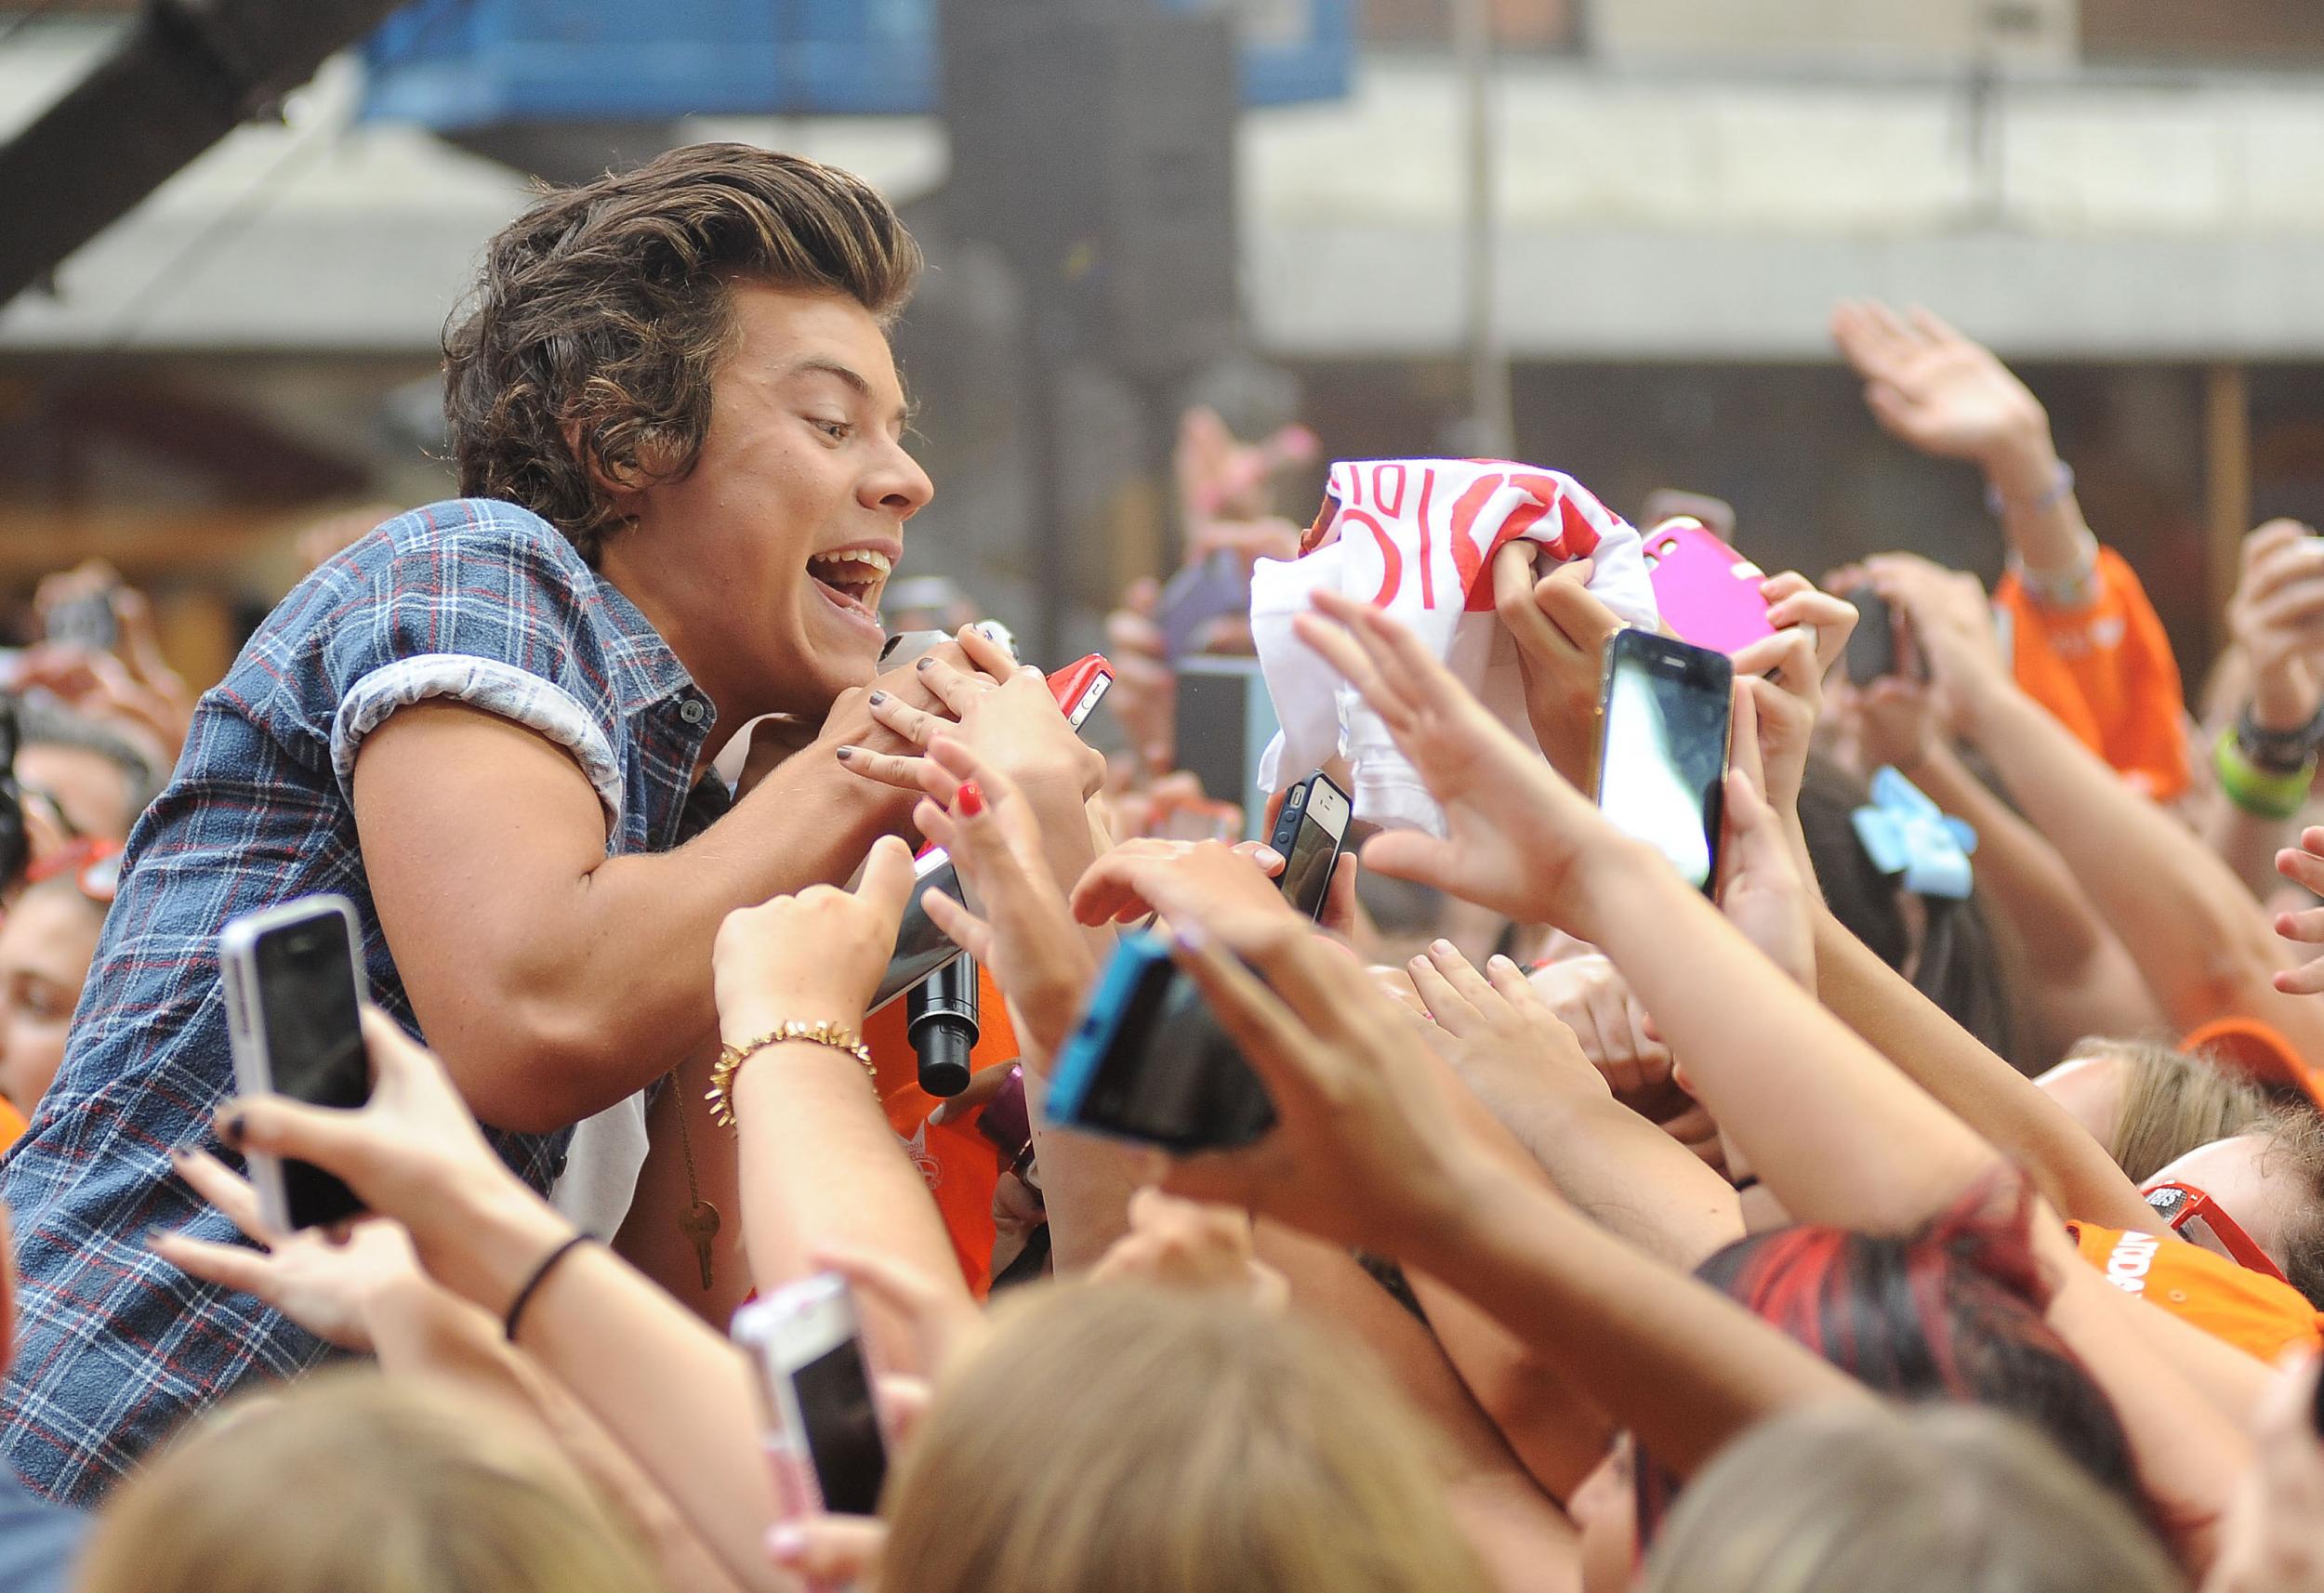 Harry Styles surrounded by a sea of fans at a live show in the US